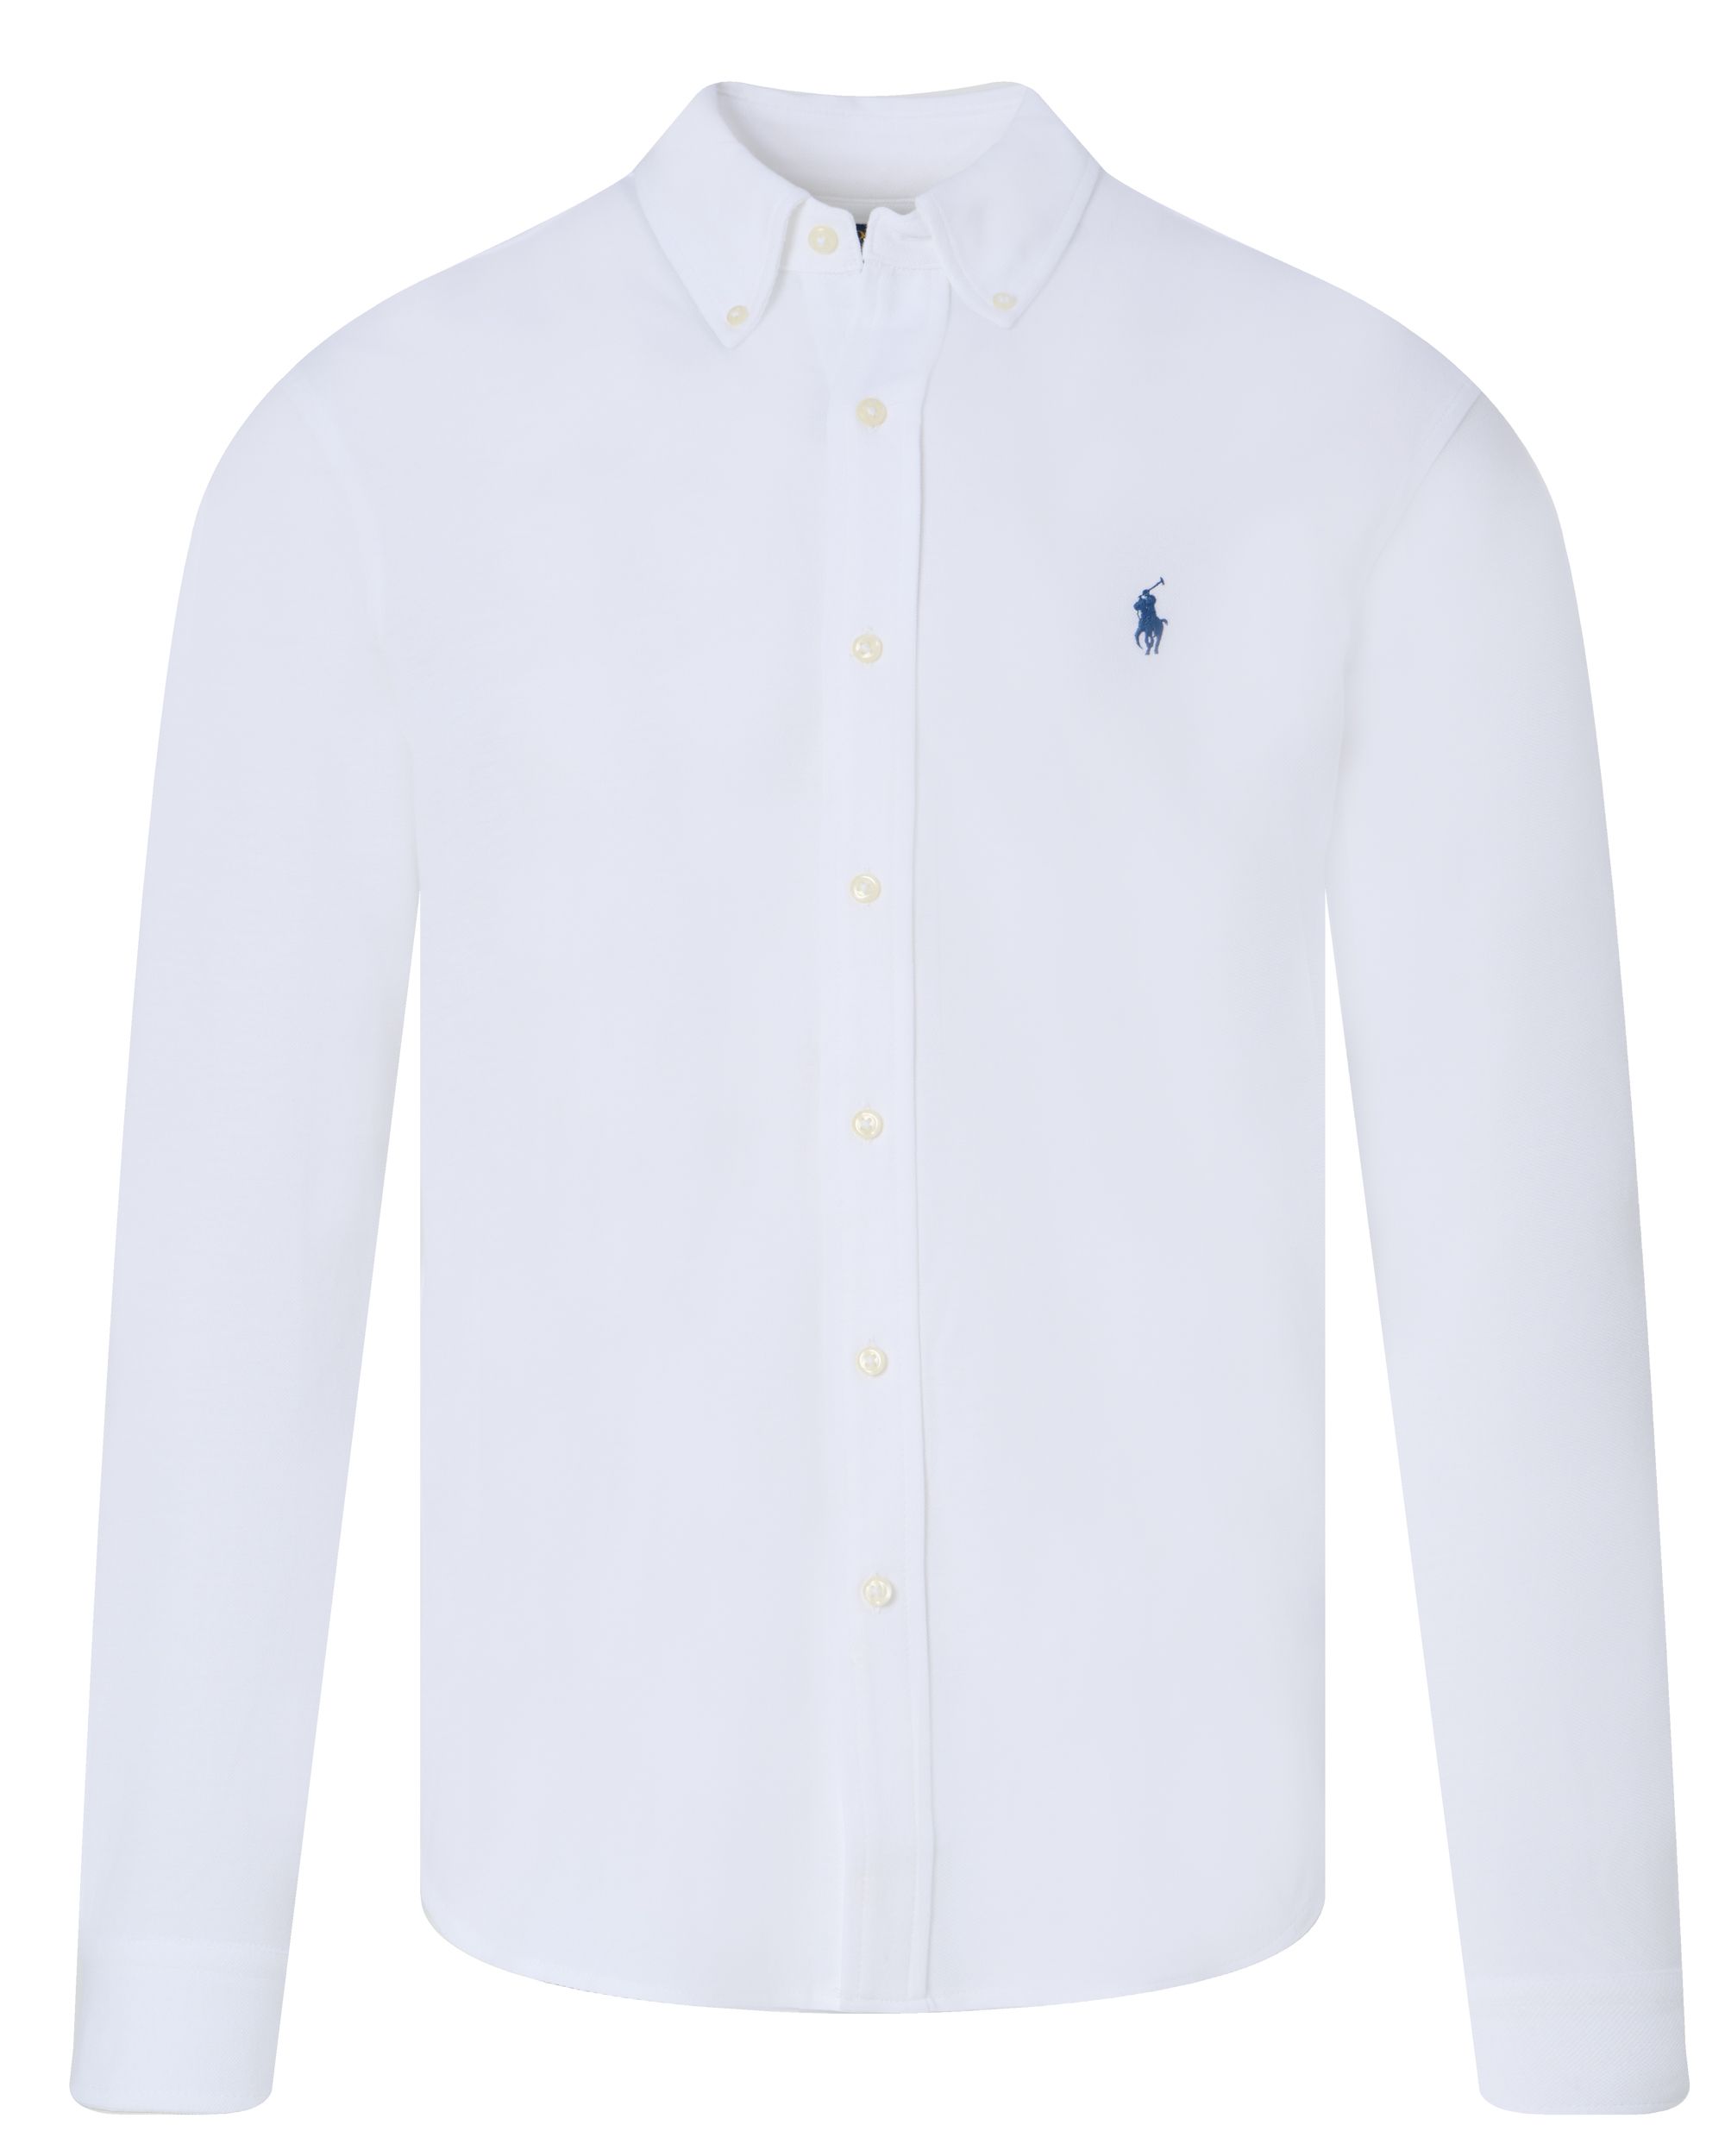 Polo Ralph Lauren Casual Overhemd LM Wit 095320-001-L